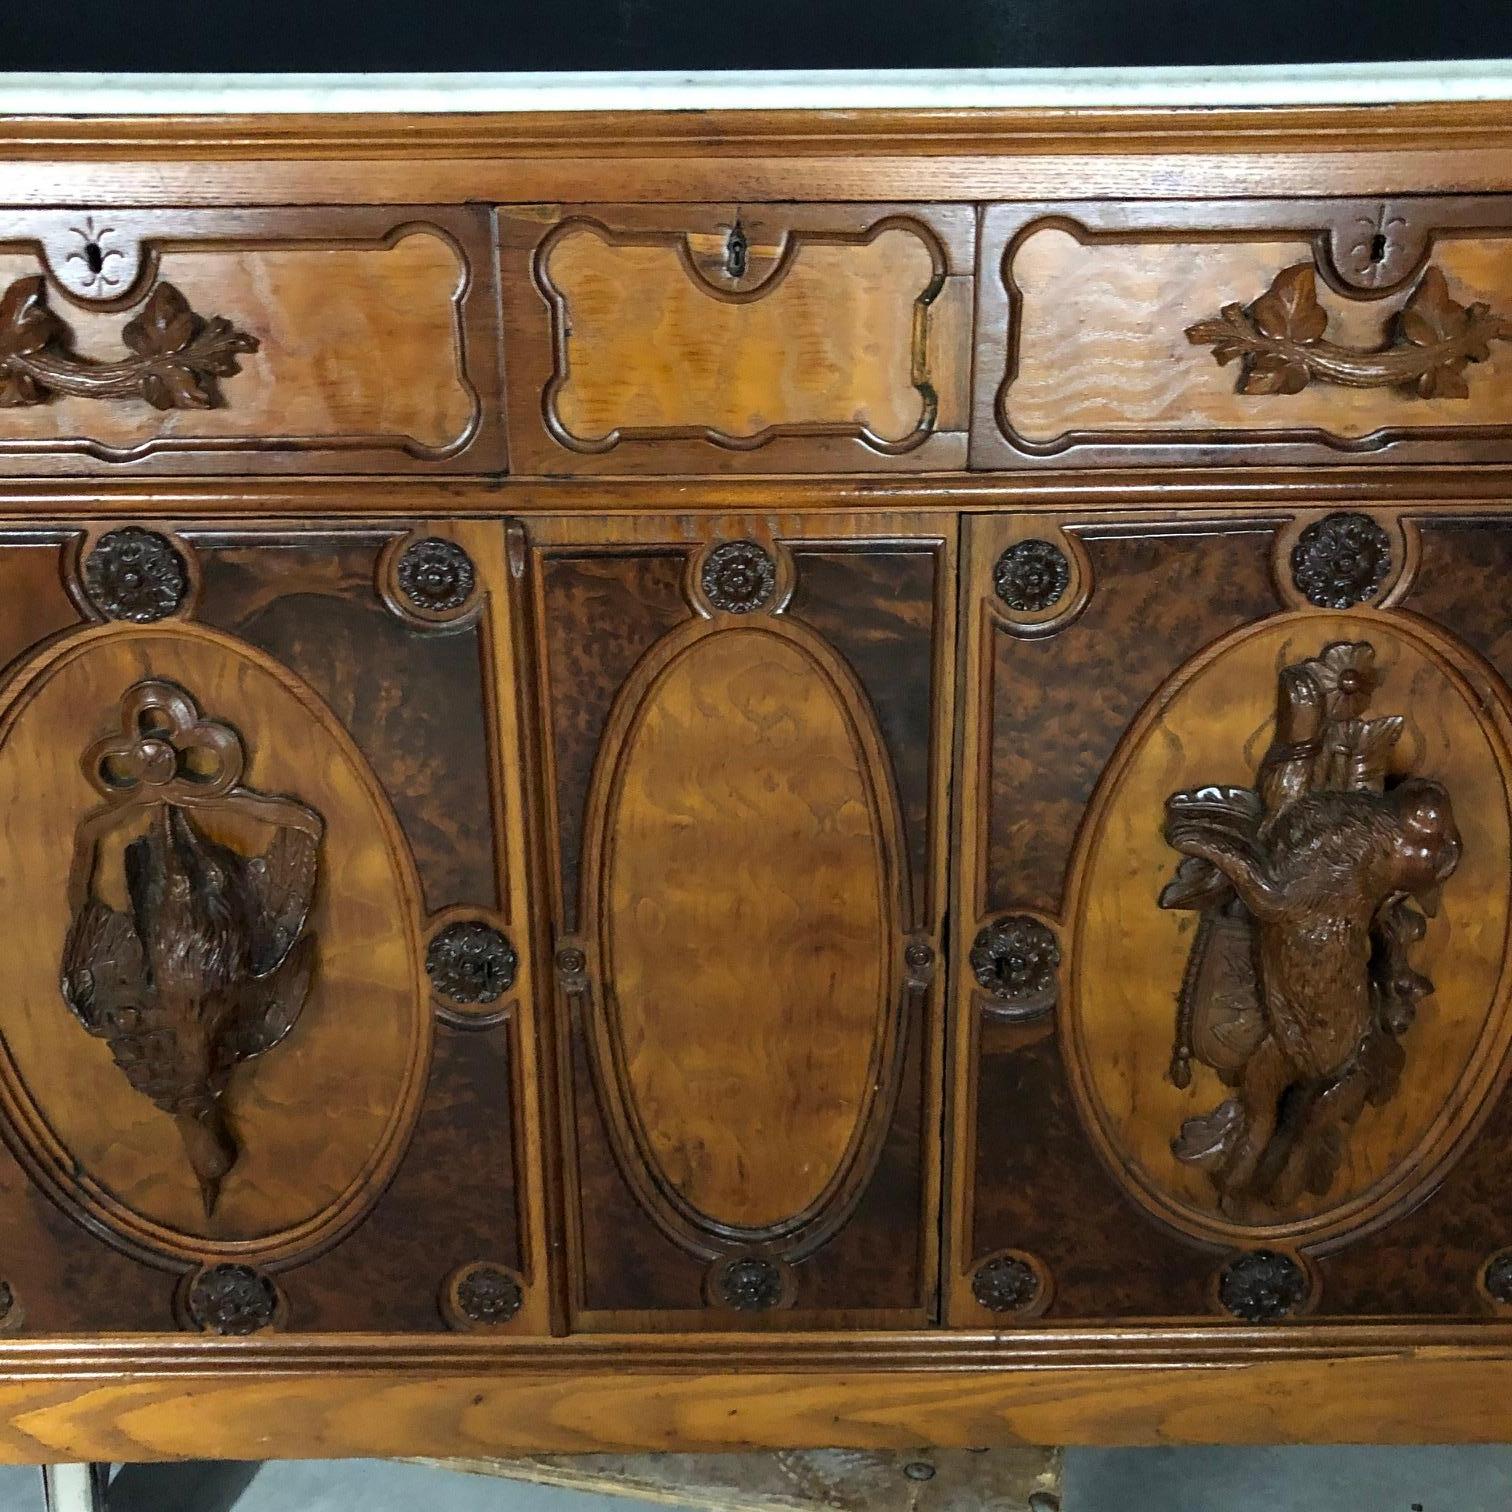 Handsome exquisitely carved hunt cabinet with 3 dimensional hare and fowl. The cabinet is gracefully curved on the corners with two doors which exhibit a Black Forest type carving. Three drawers open below the Carrara marble top. It has a walnut